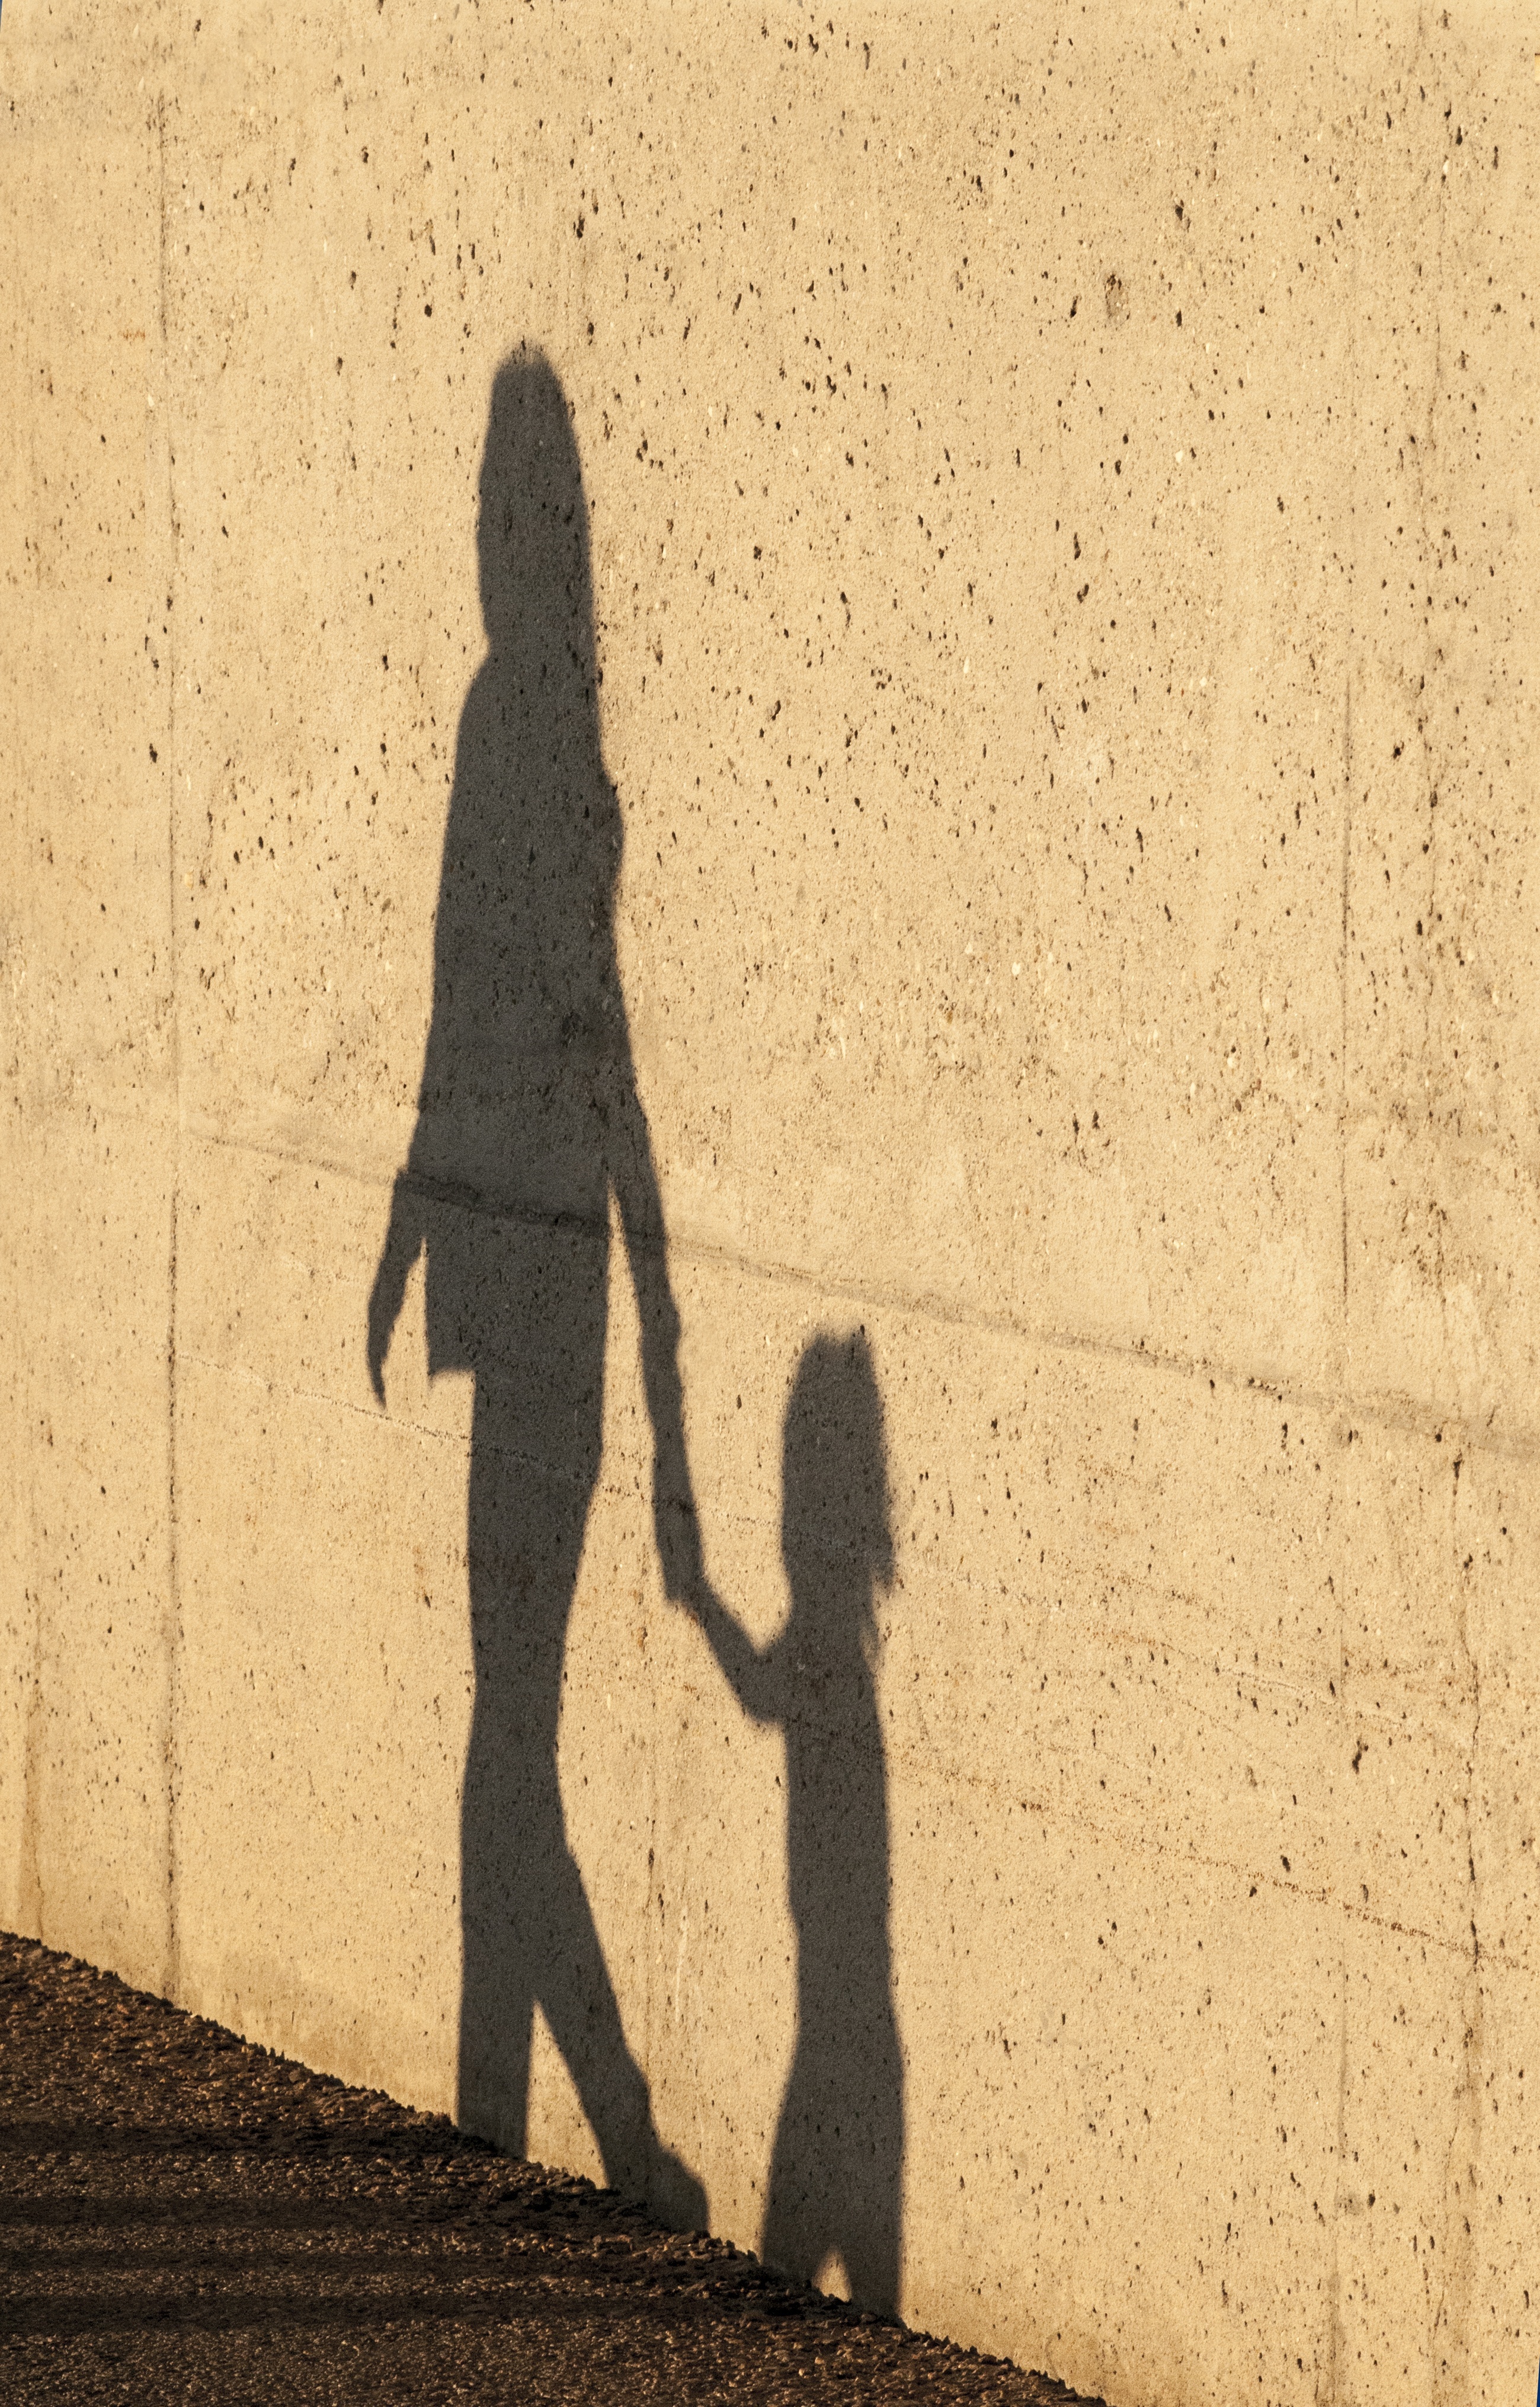 Parental Child Abduction: Four Practical Things You Can Do